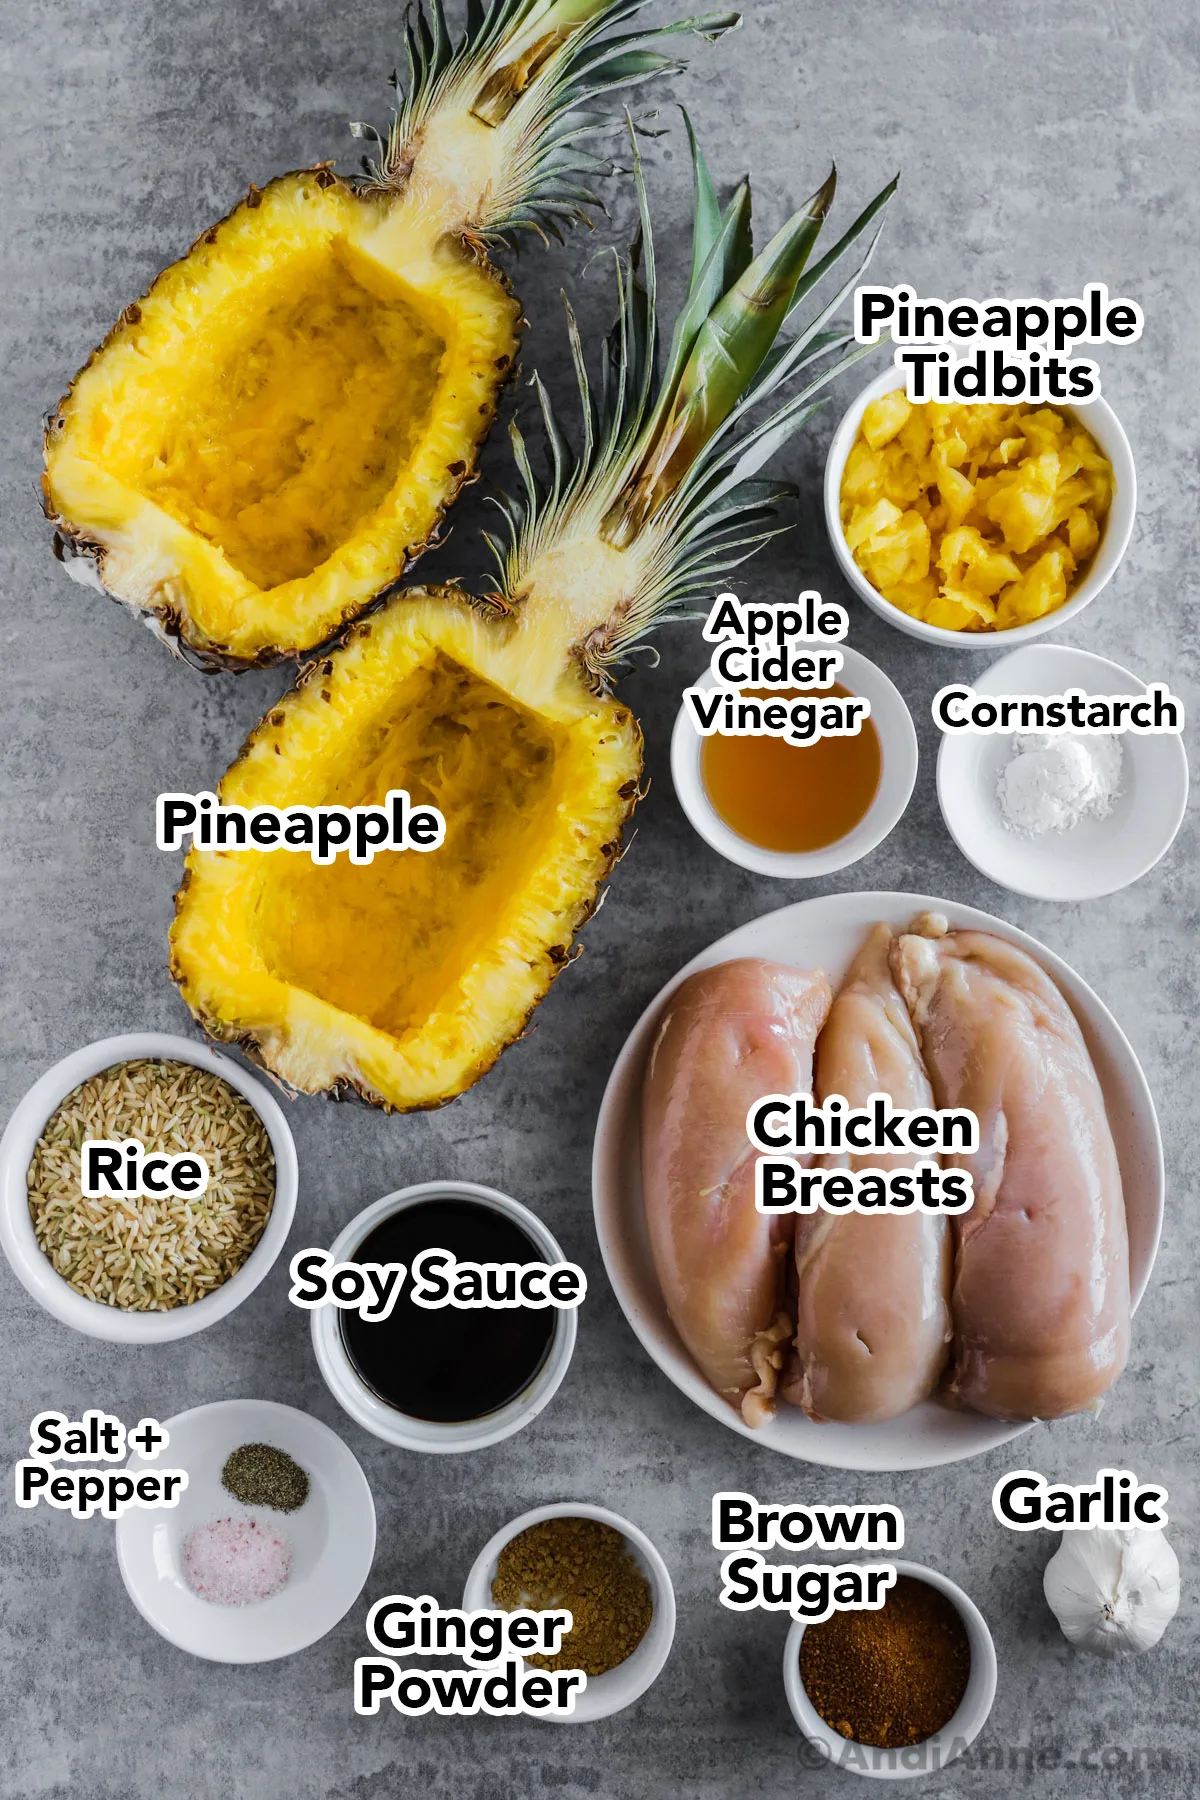 Recipe ingredients on the counter including sliced pineapple boats, bowls of apple cider vinegar, pineapple chunks, cornstarch, chicken breasts, rice, soy sauce, ginger powder, brown sugar and a garlic bulb.